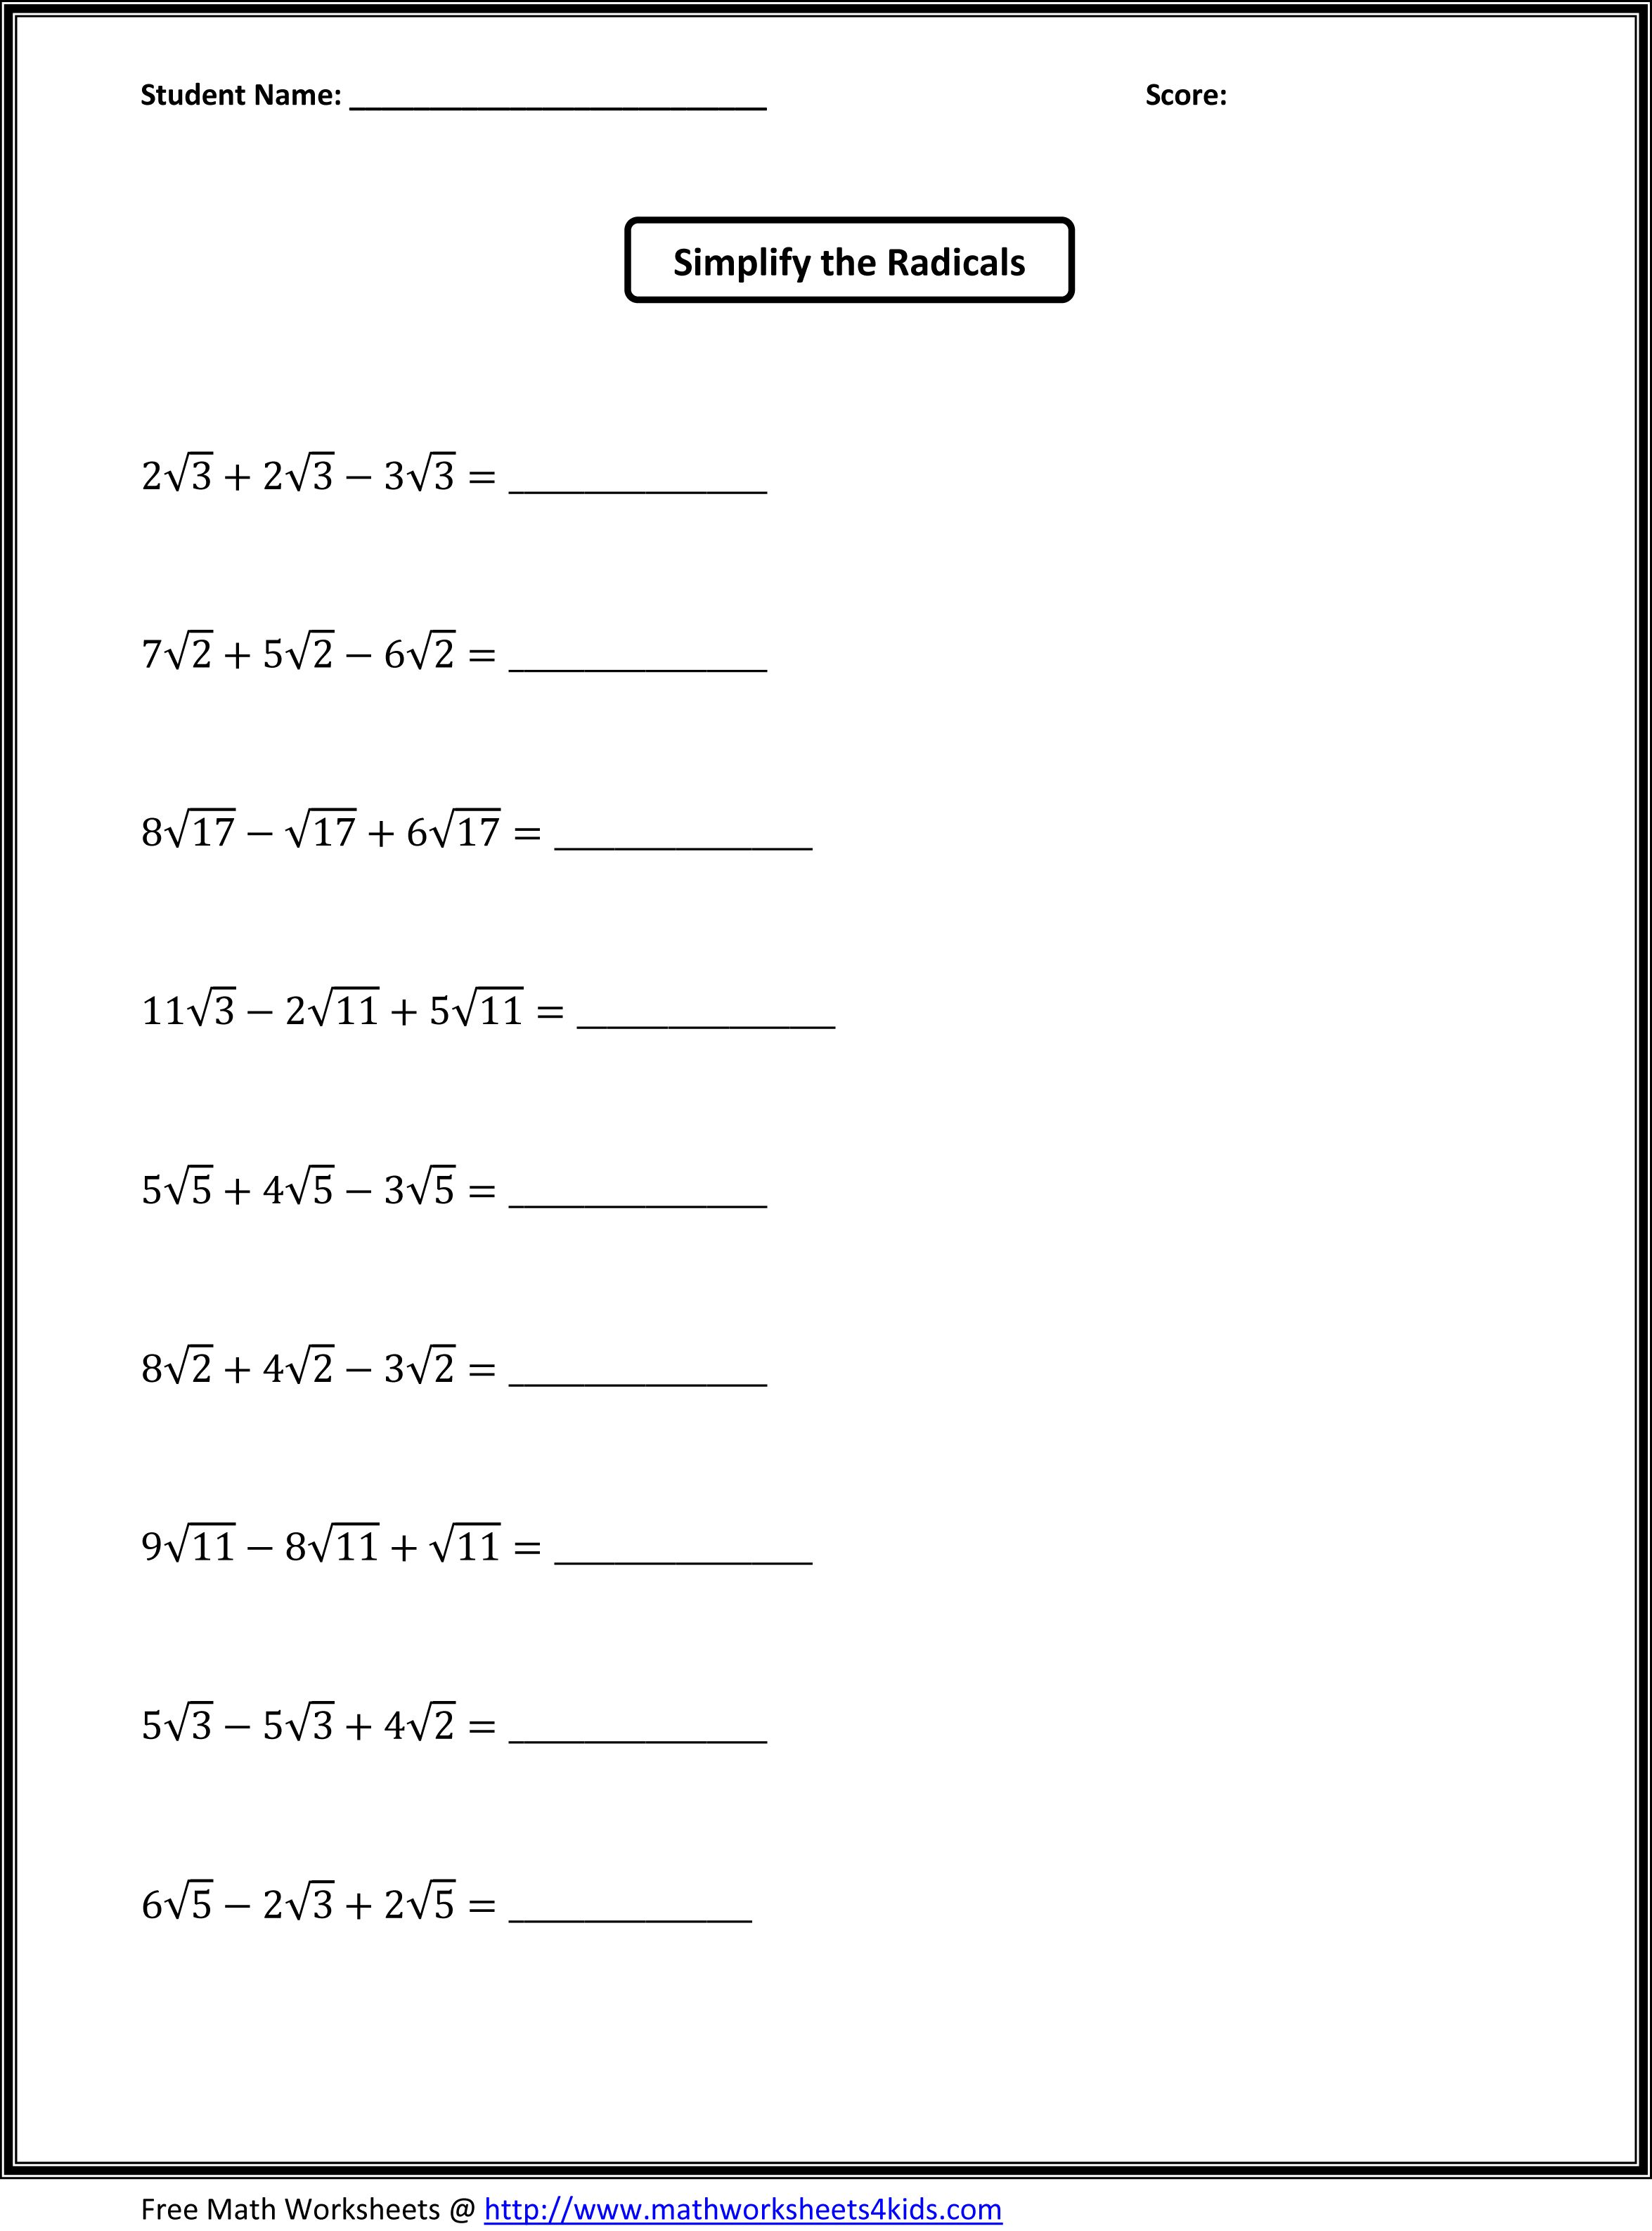 Free Printable Math Worksheets For 6th And 7th Grade Learning How to Read